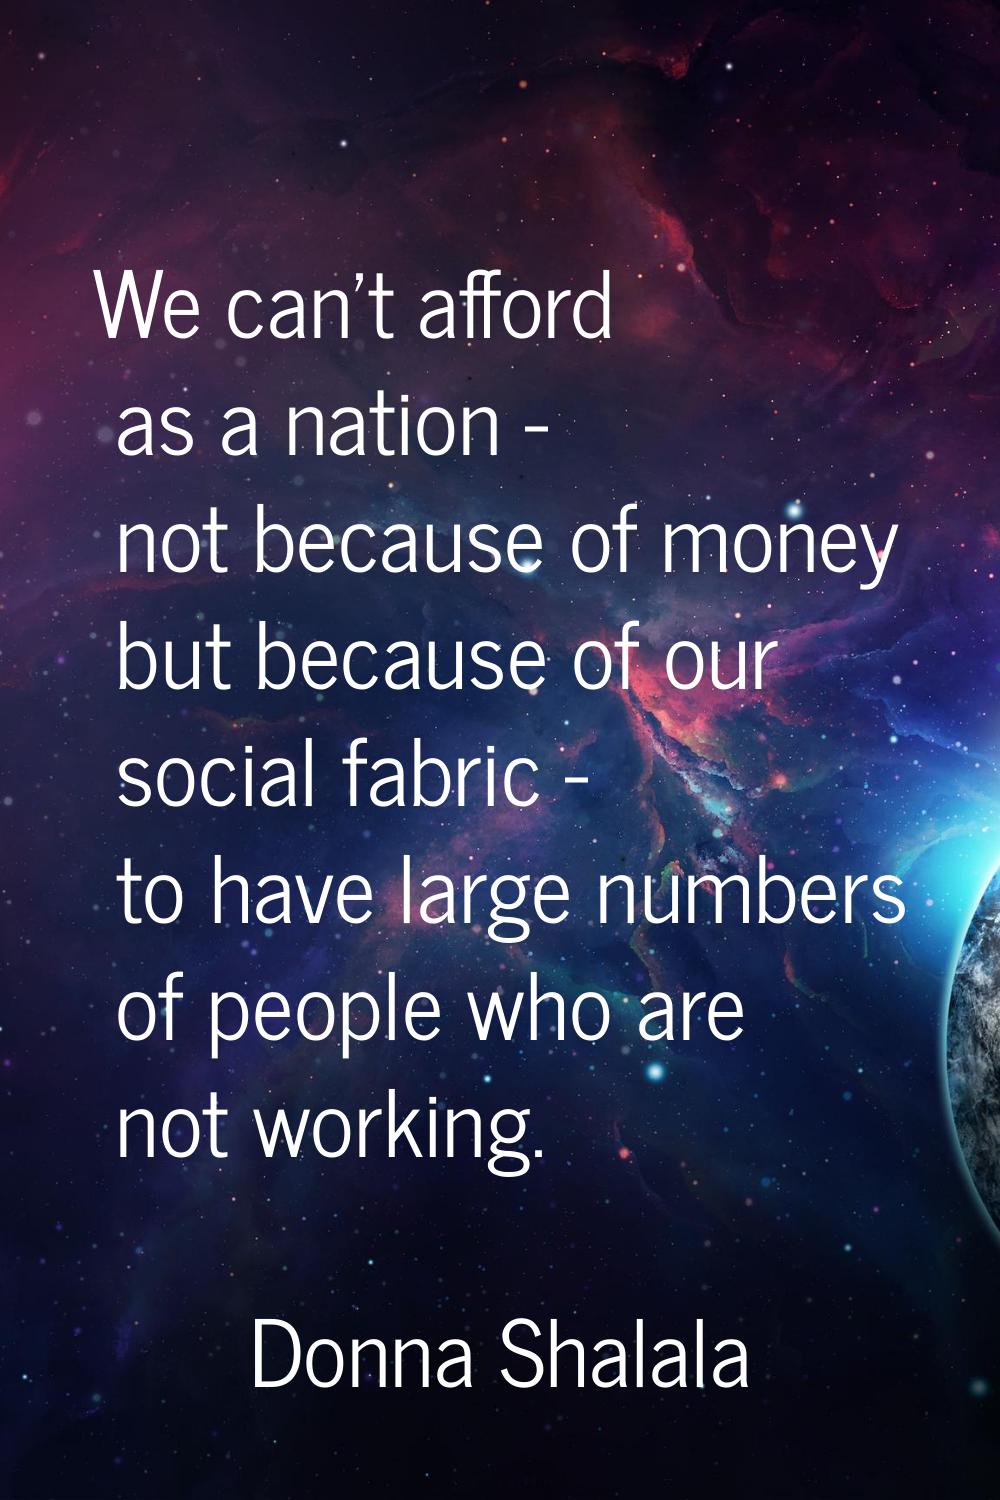 We can't afford as a nation - not because of money but because of our social fabric - to have large